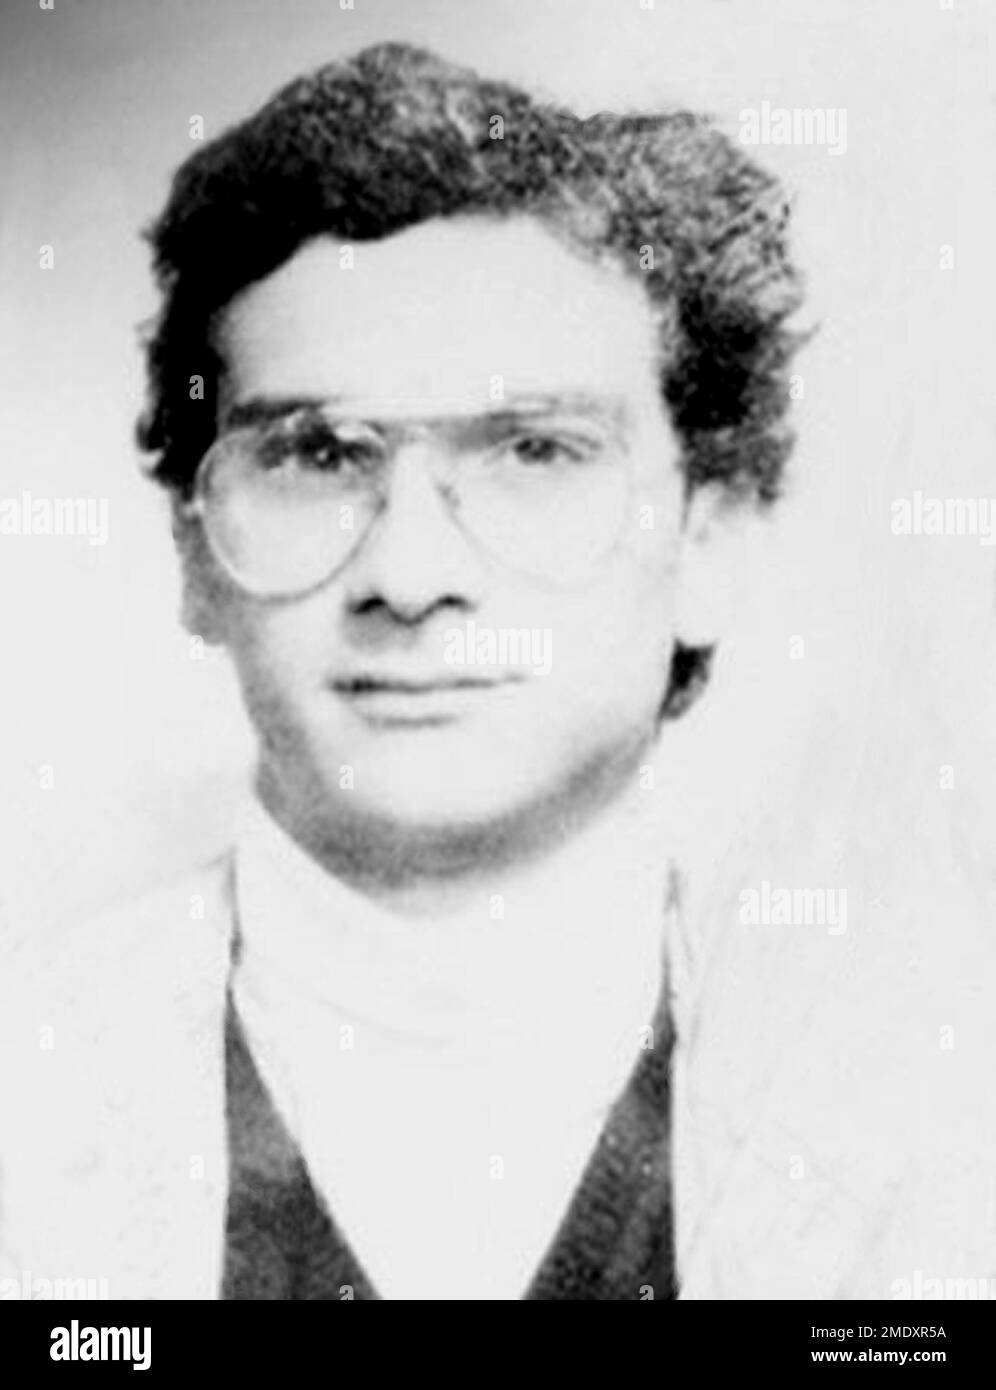 1980 ca, Castelvetrano , Trapani ,  ITALY : The celebrated italian COSA NOSTRA Mafioso and killer criminal outlaw MATTEO MESSINA DENARO ( born 26 april 1962 also known as Diabolik or U Siccu ) aged 20 . Was a Sicilian Mafia boss from Castelvetrano . He was considered to be one of the new leaders of the Sicilian mob after the arrests of Bernardo Provenzano on 2006 and Salvatore Lo Piccolo in 2007 . The son of a Mafia boss Francesco Denaro . After 30 years on the run, he was arrested on 16 January 2023 in a private clinic in Sicily's capital, Palermo . Photoboth diffused by the italian Police an Stock Photo